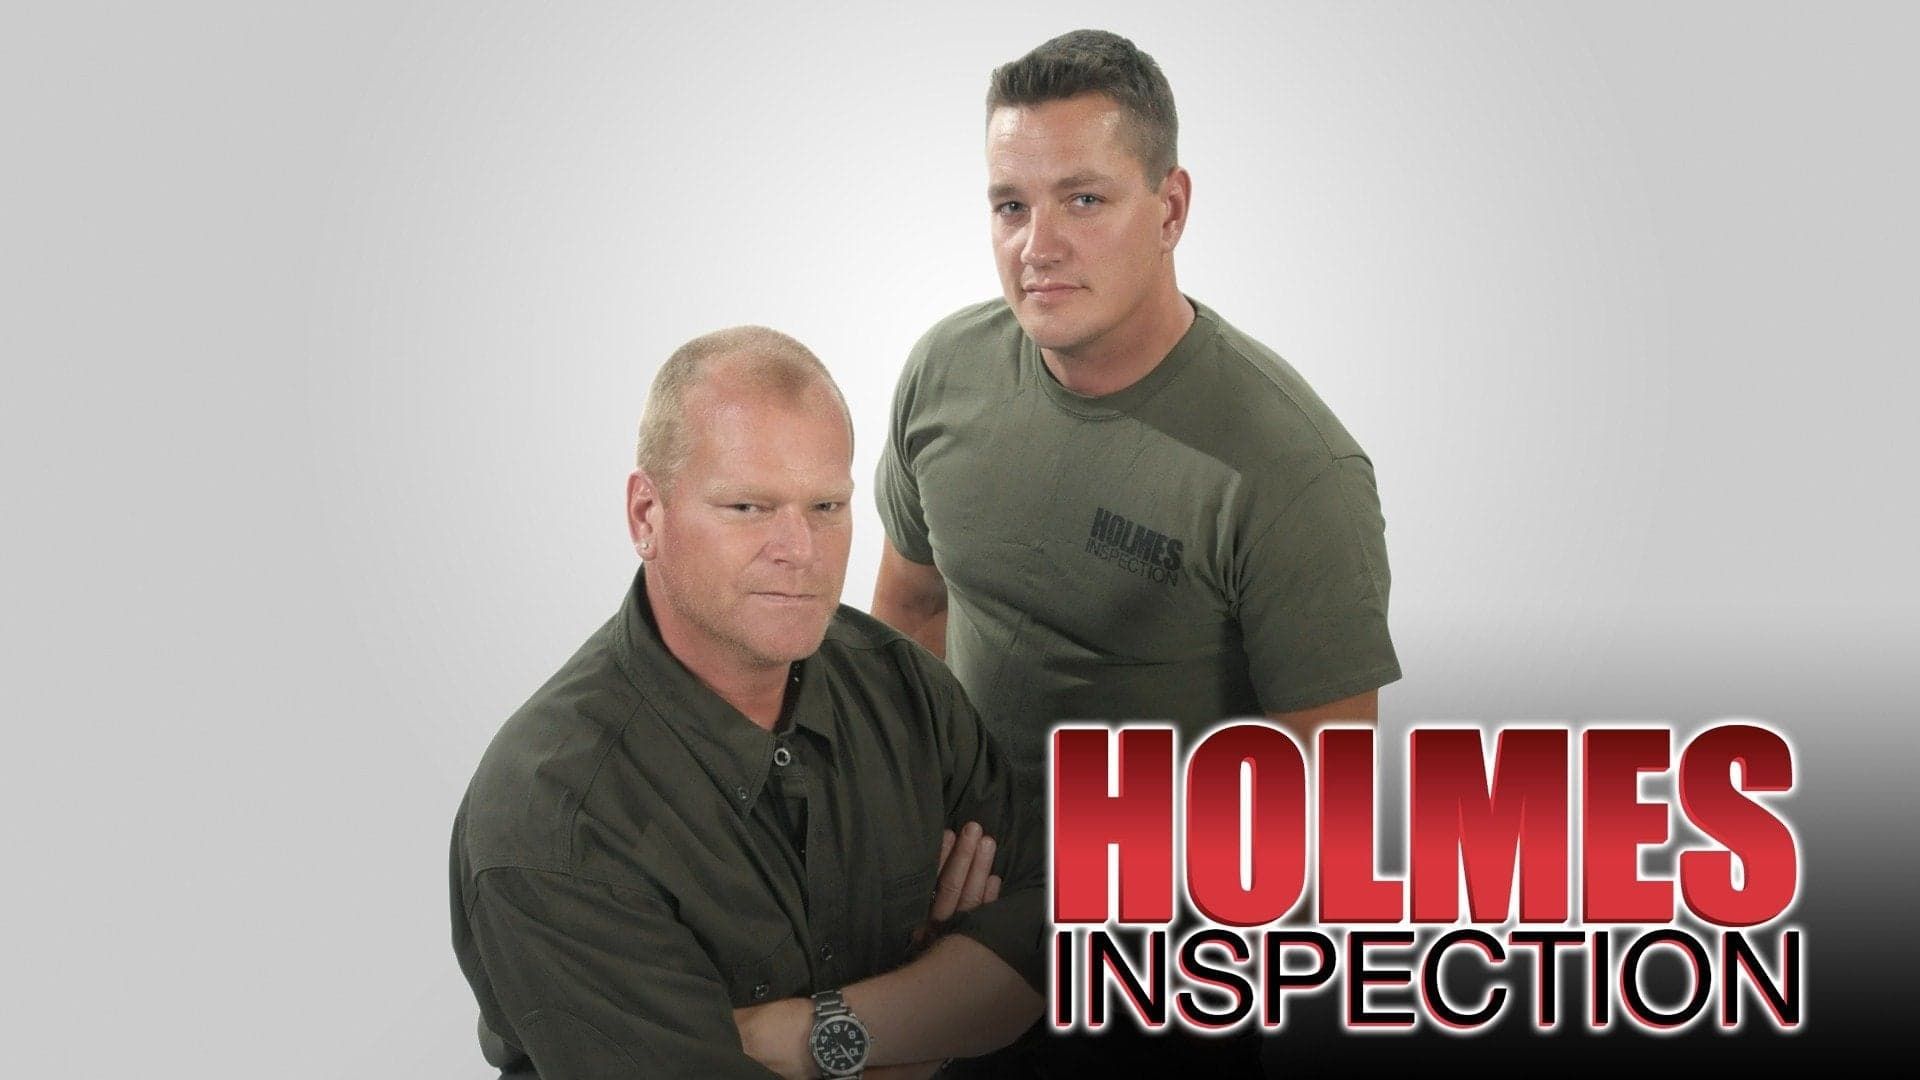 Holmes Inspection background